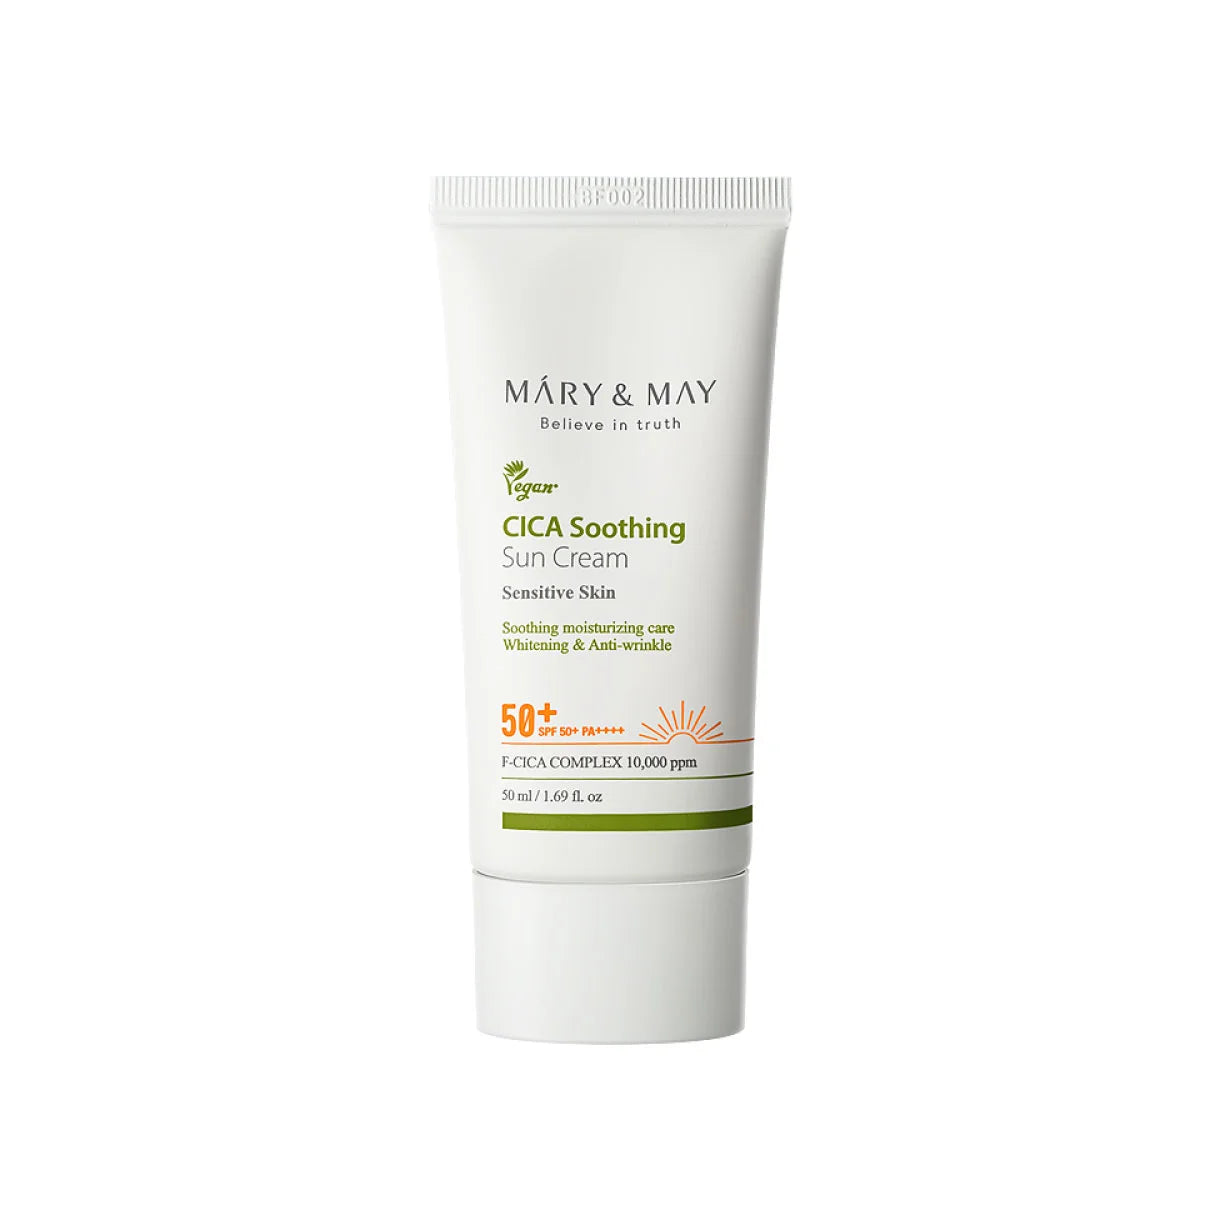 Mary & May CICA Soothing Sun Cream SPF50+ PA++++ best Korean sunscreen hydrating great for all skin types dry sensitive combination skin redness K Beauty World